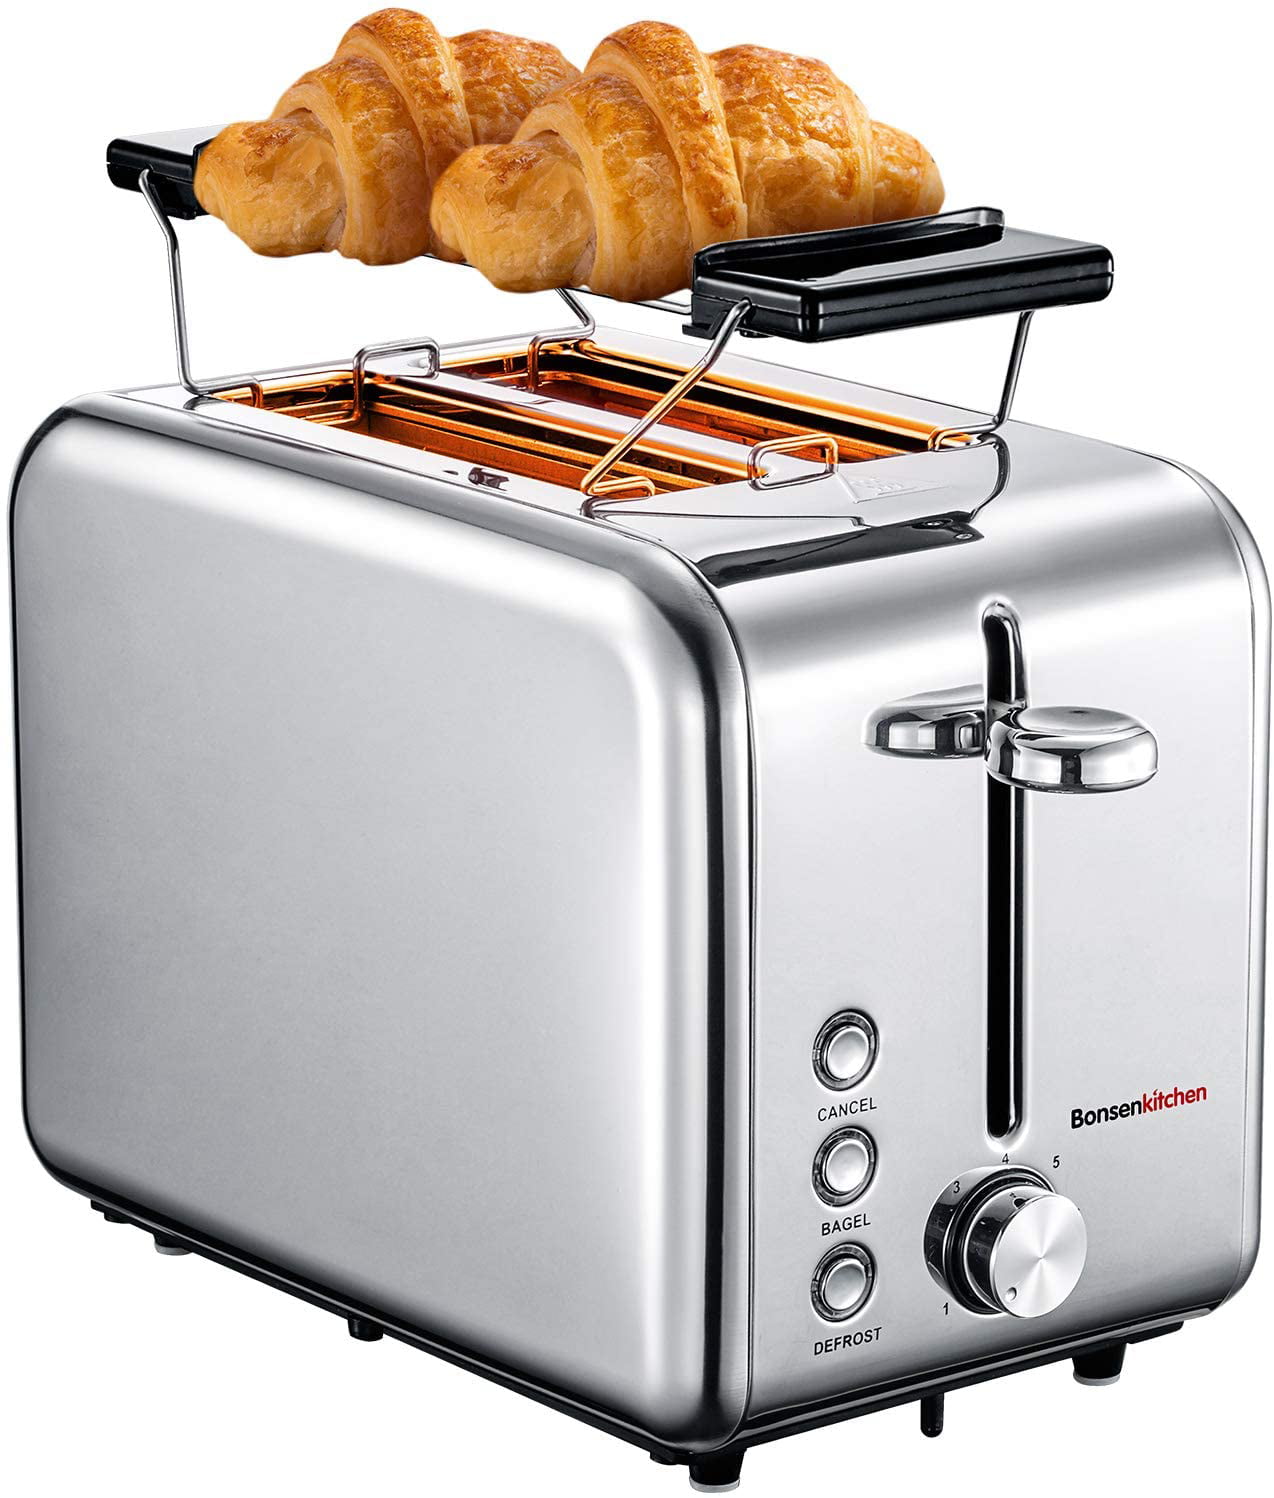 Defrost/Bagel/Cancel Functions Compact Kitchen Toaster with 7 Browning Settings Bonsenkitchen Wide Slot 2-Slice Black Stainless Steel Toaster 